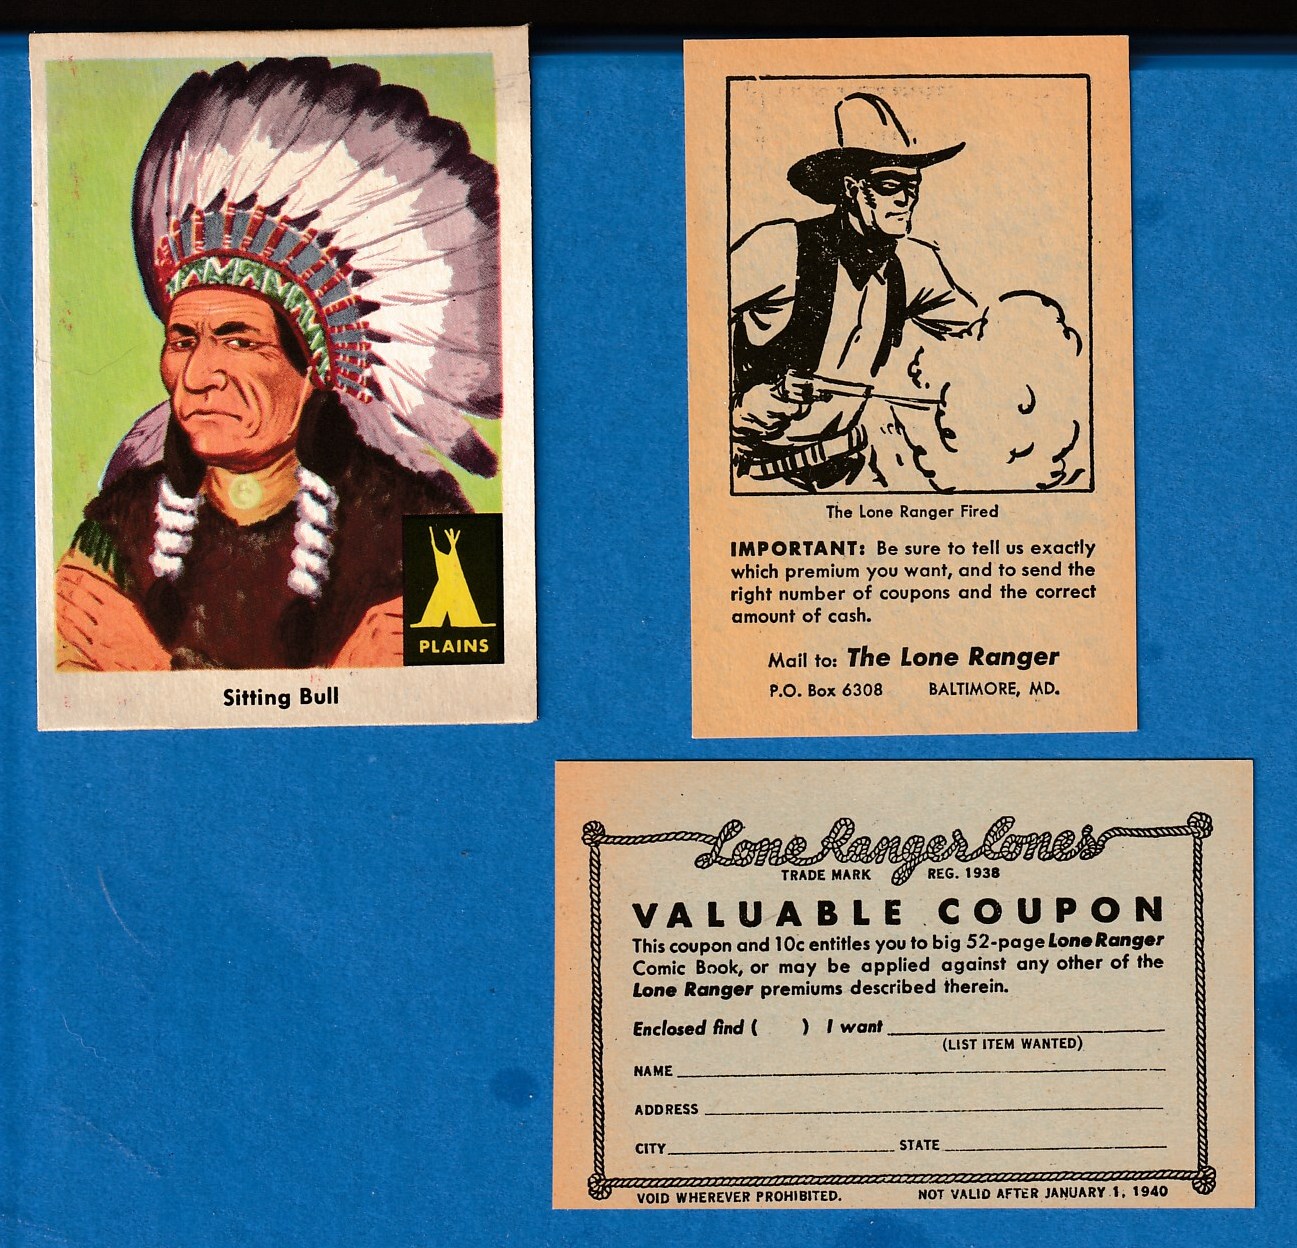 1939 Lone Ranger Cones Coupon card - The Lone Ranger Fired n cards value